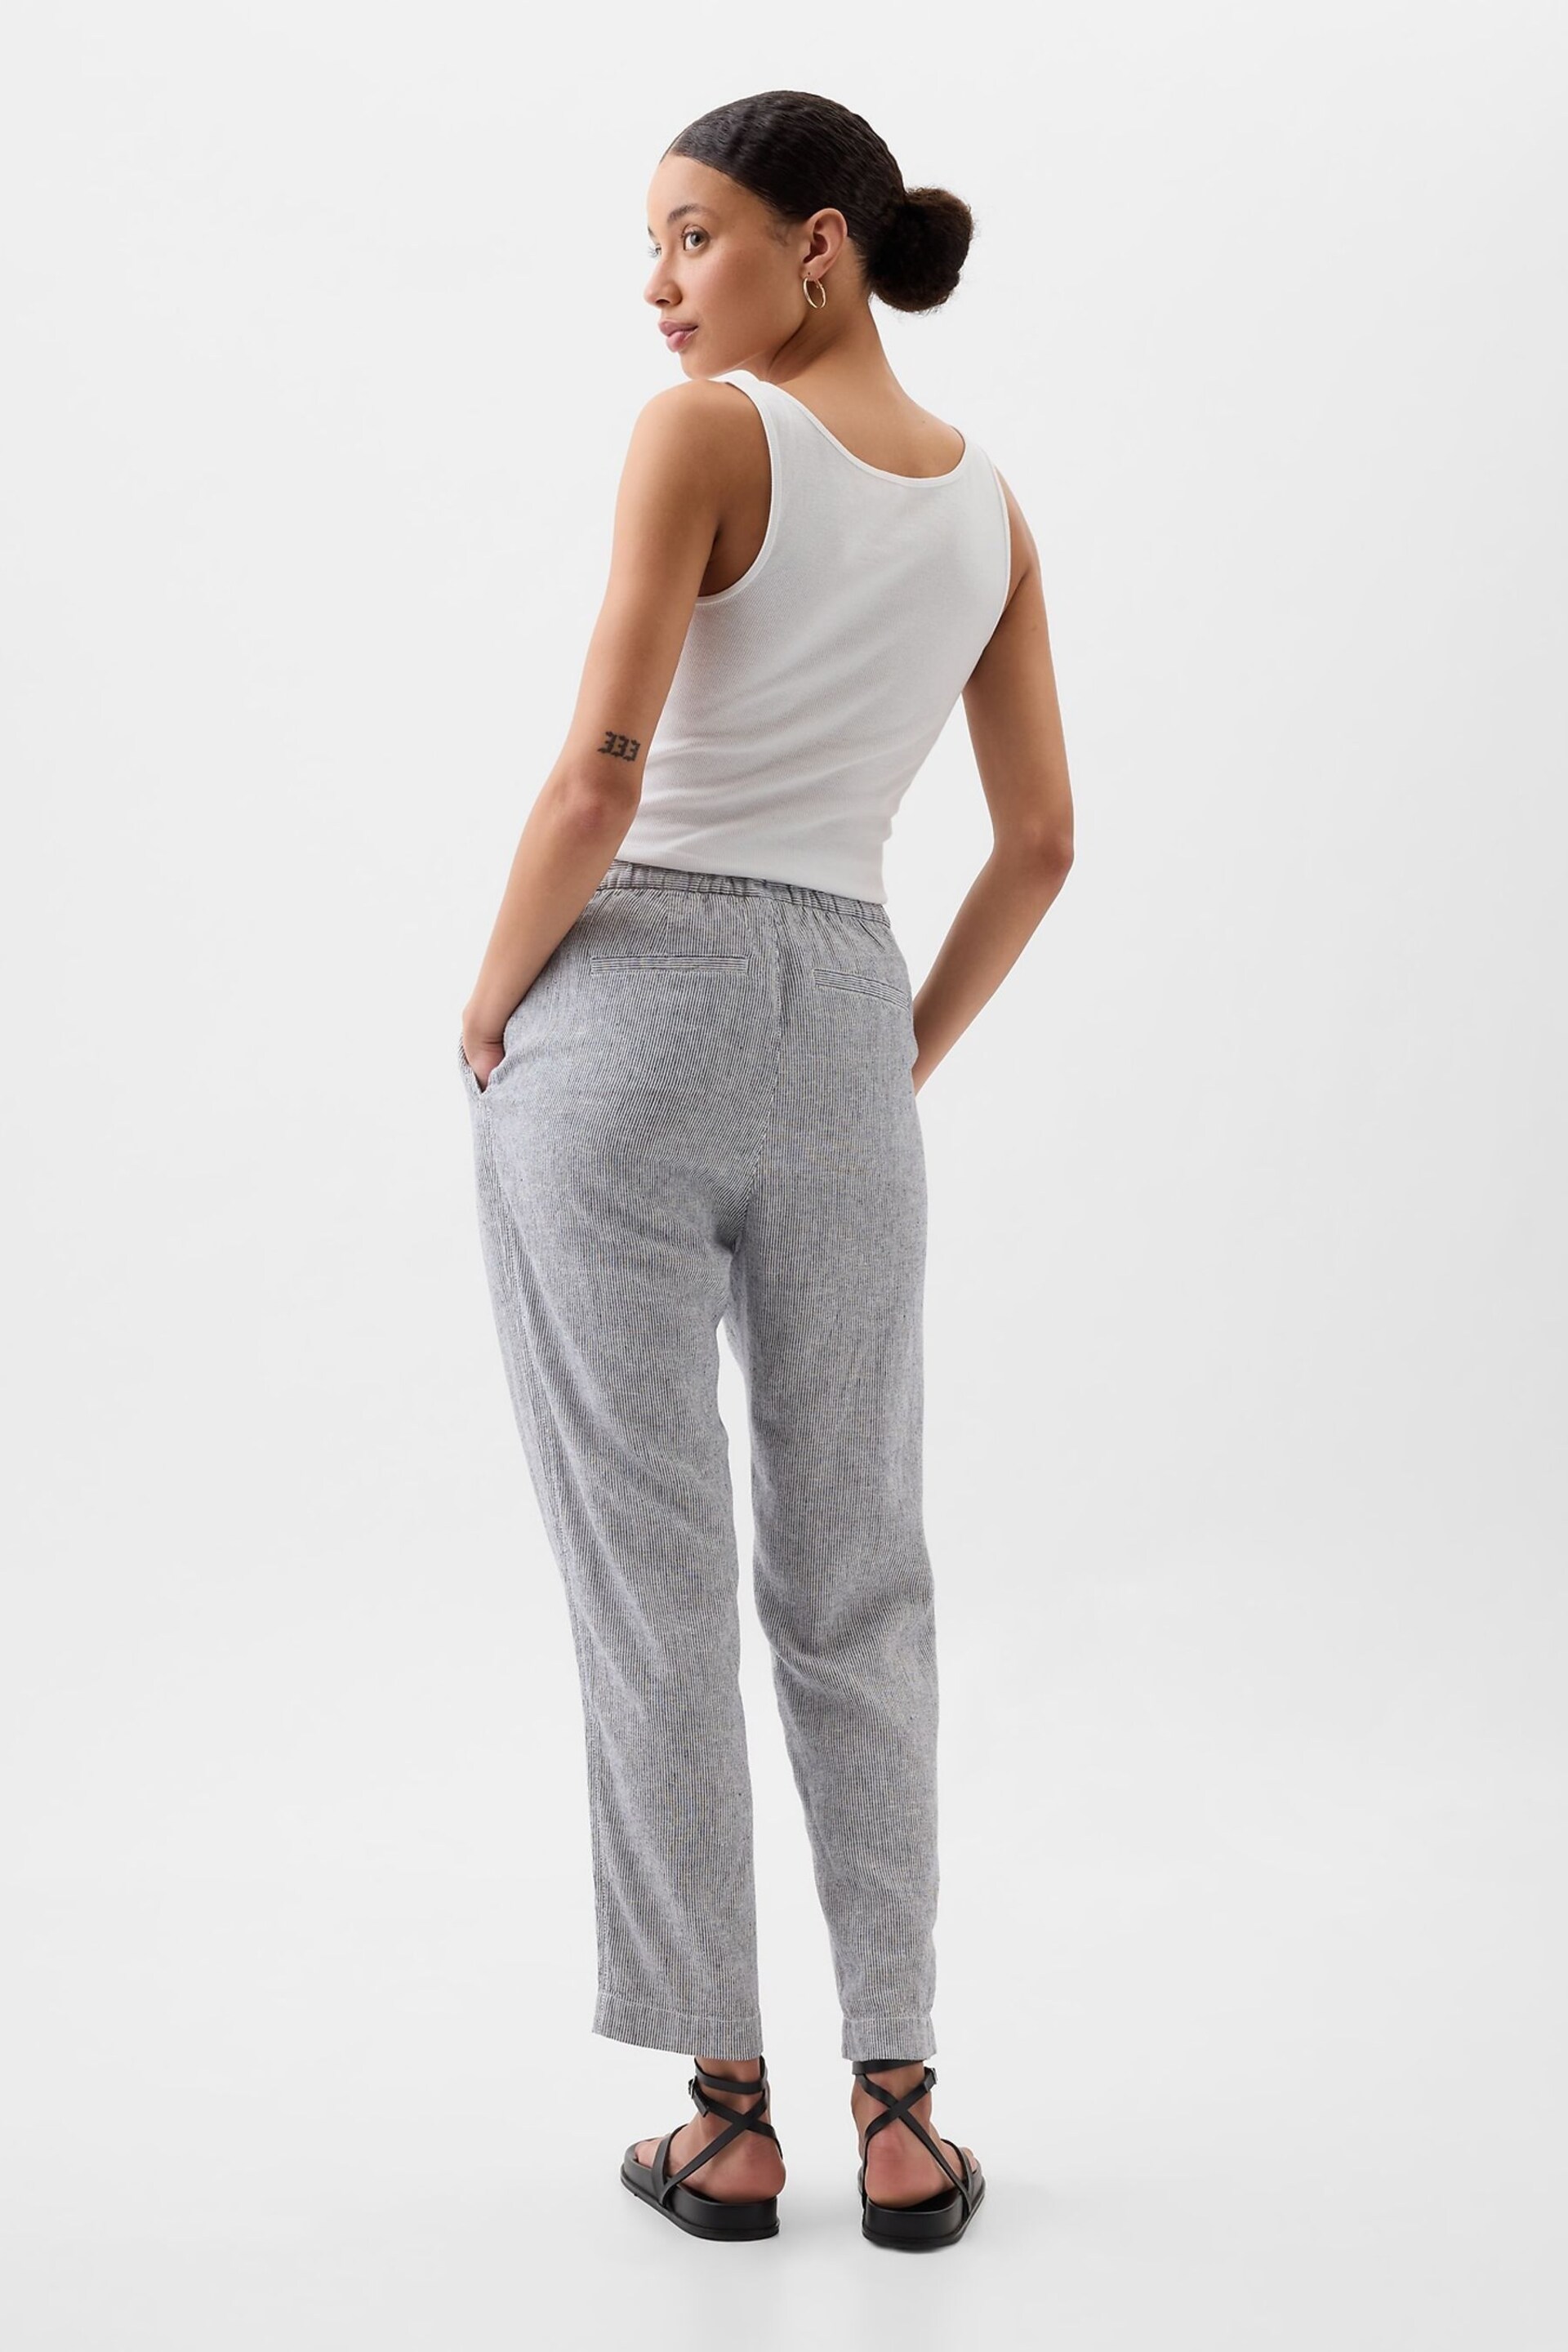 Gap Grey Linen Cotton Pull On Taper Trousers - Image 2 of 2